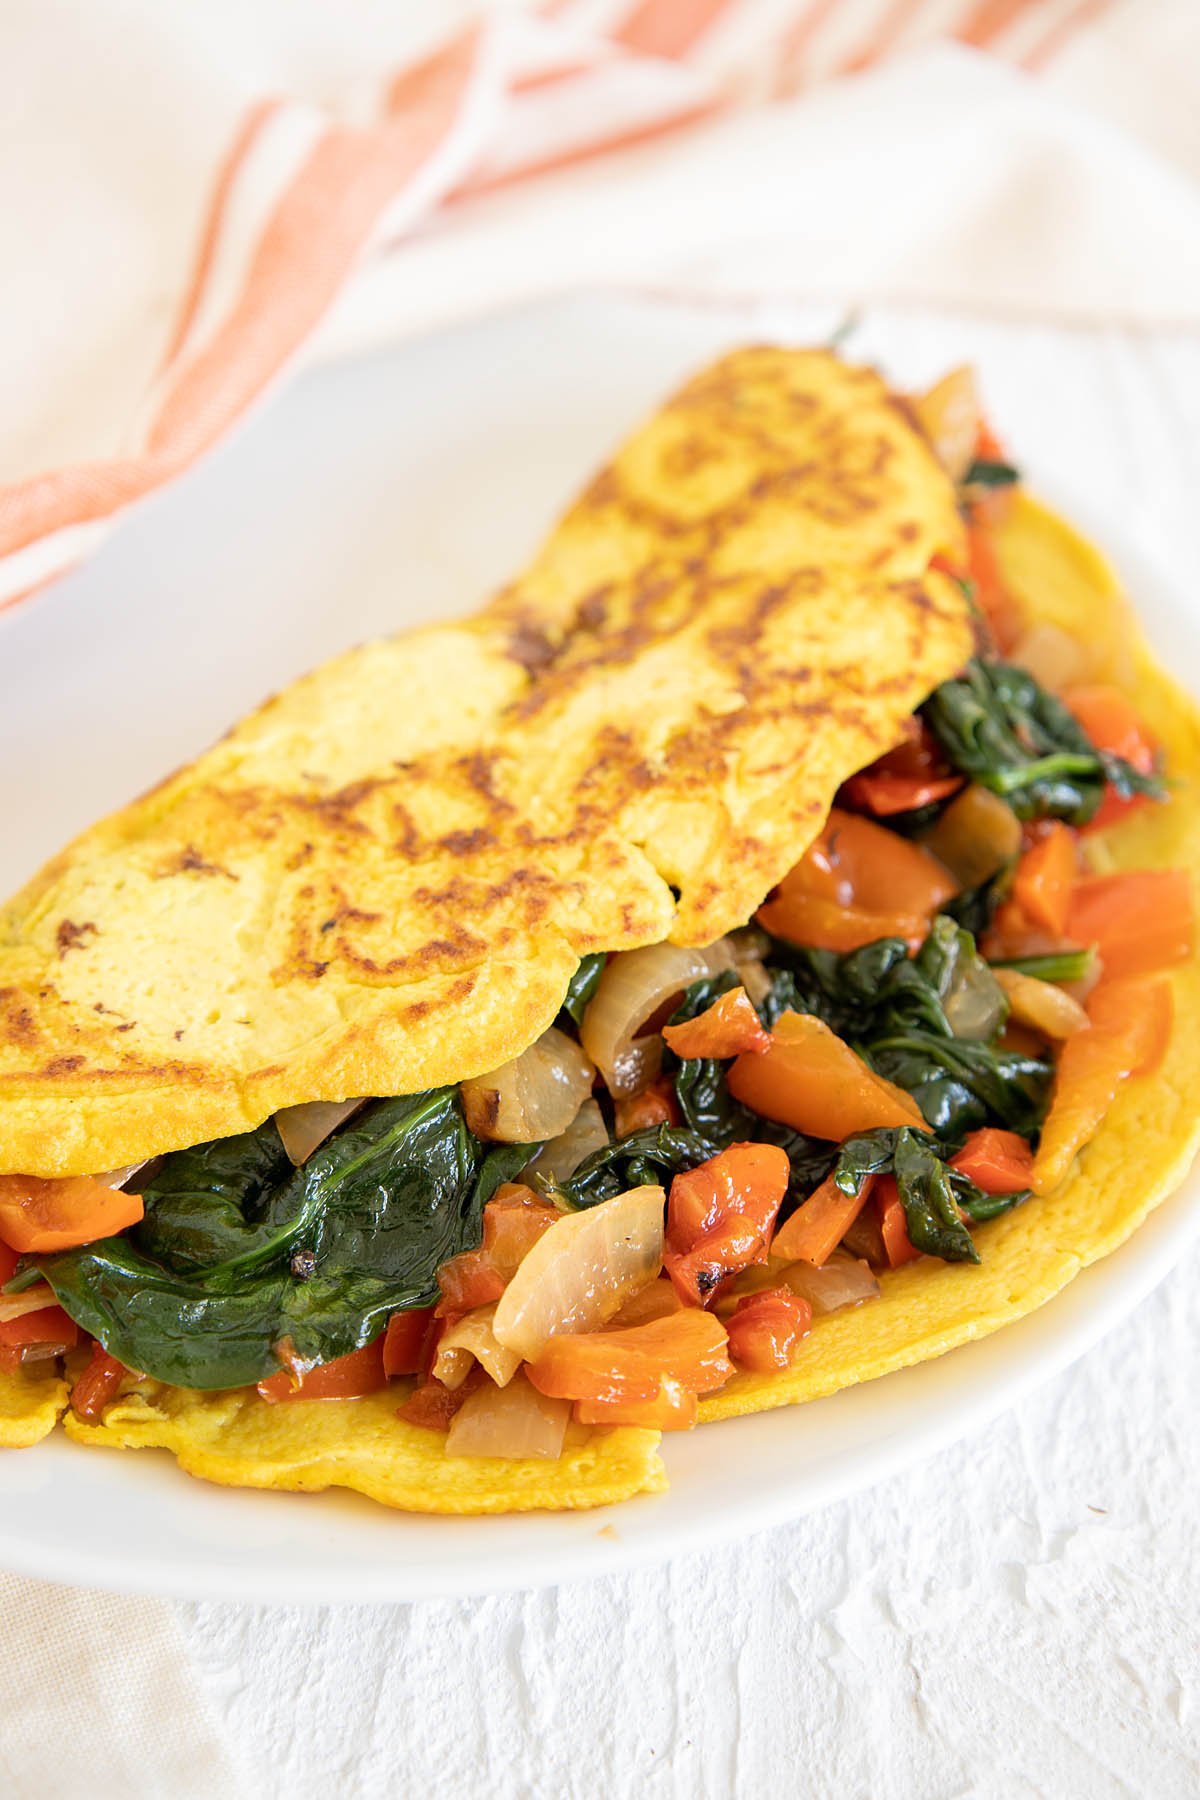 Vegan Tofu Omelette with veggies on a plate.